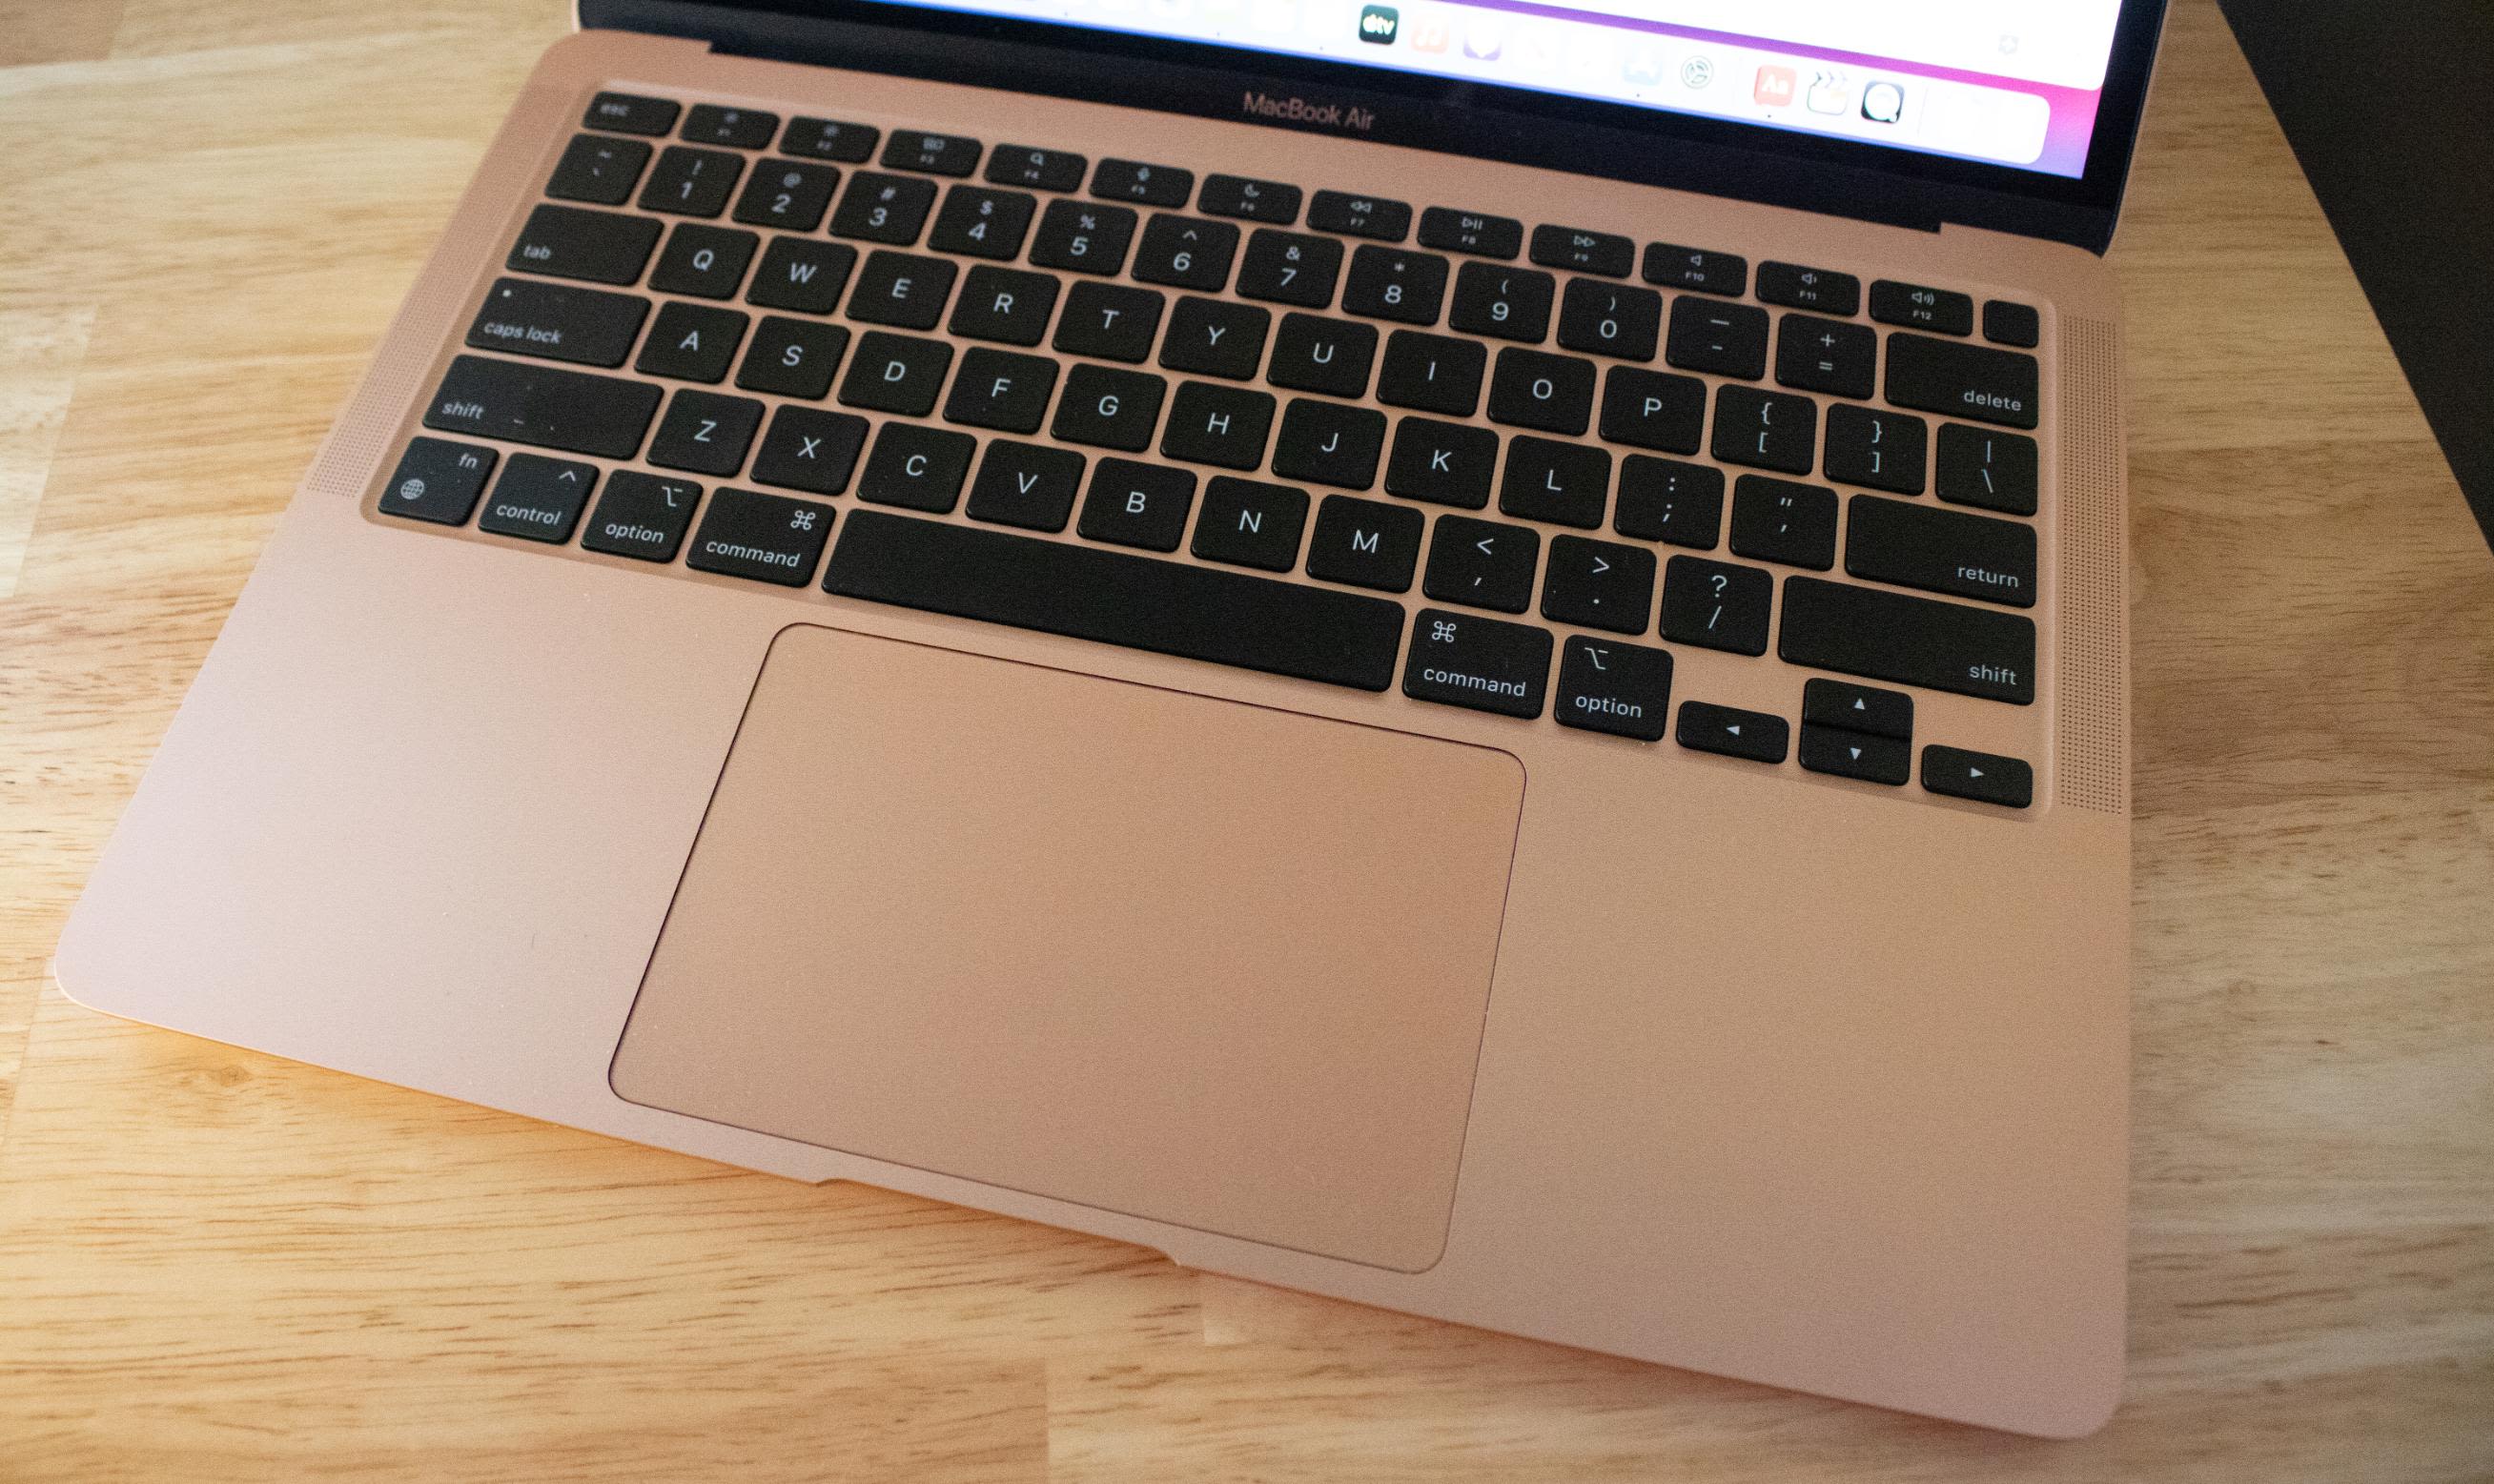 Apple MacBook Air review: it's the new standard